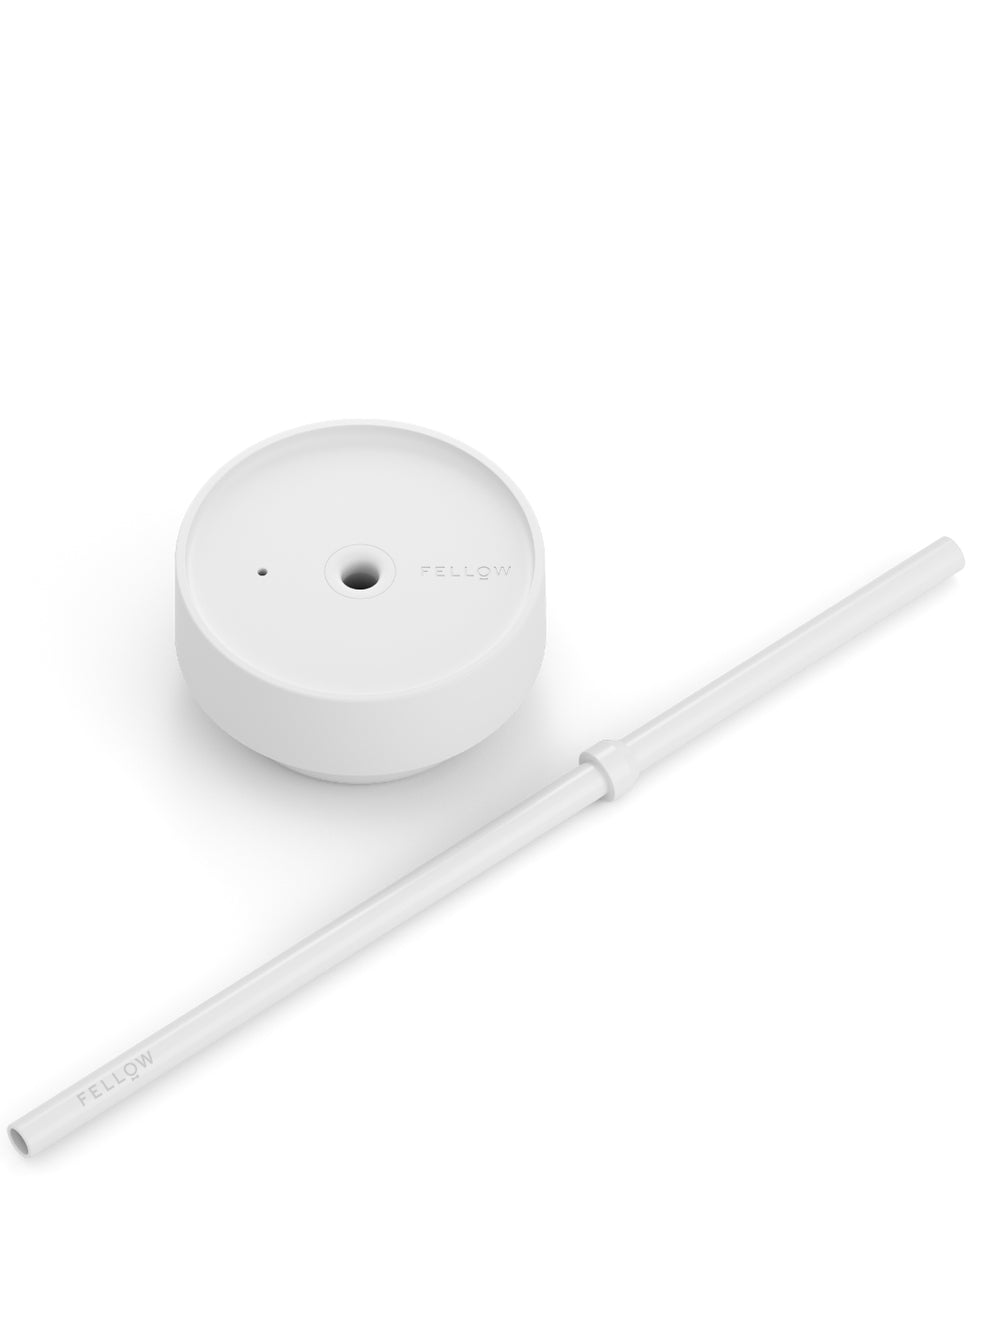 Fellow Carter Cold Lid + Straw Kit (For 16oz Only) - Matte White